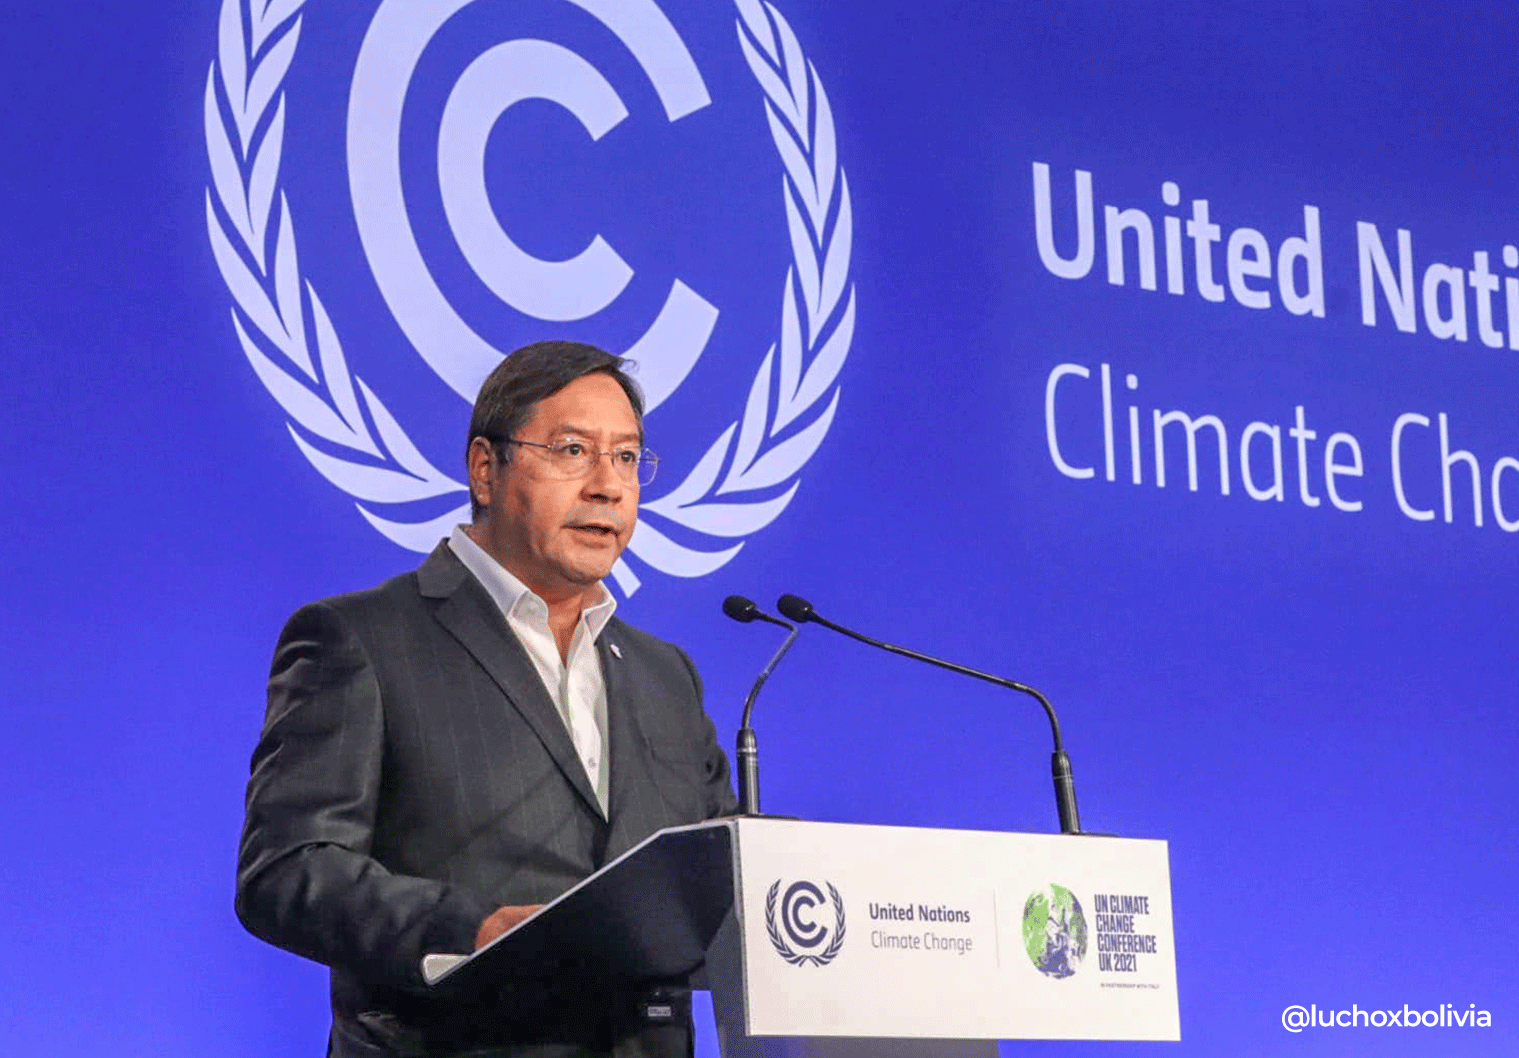 Bolivia's president Luis Arce used the COP26 summit to speak against the "green capitalism" offered by the rich capitalist nations and in favor of alternatives which put humanity at the center.